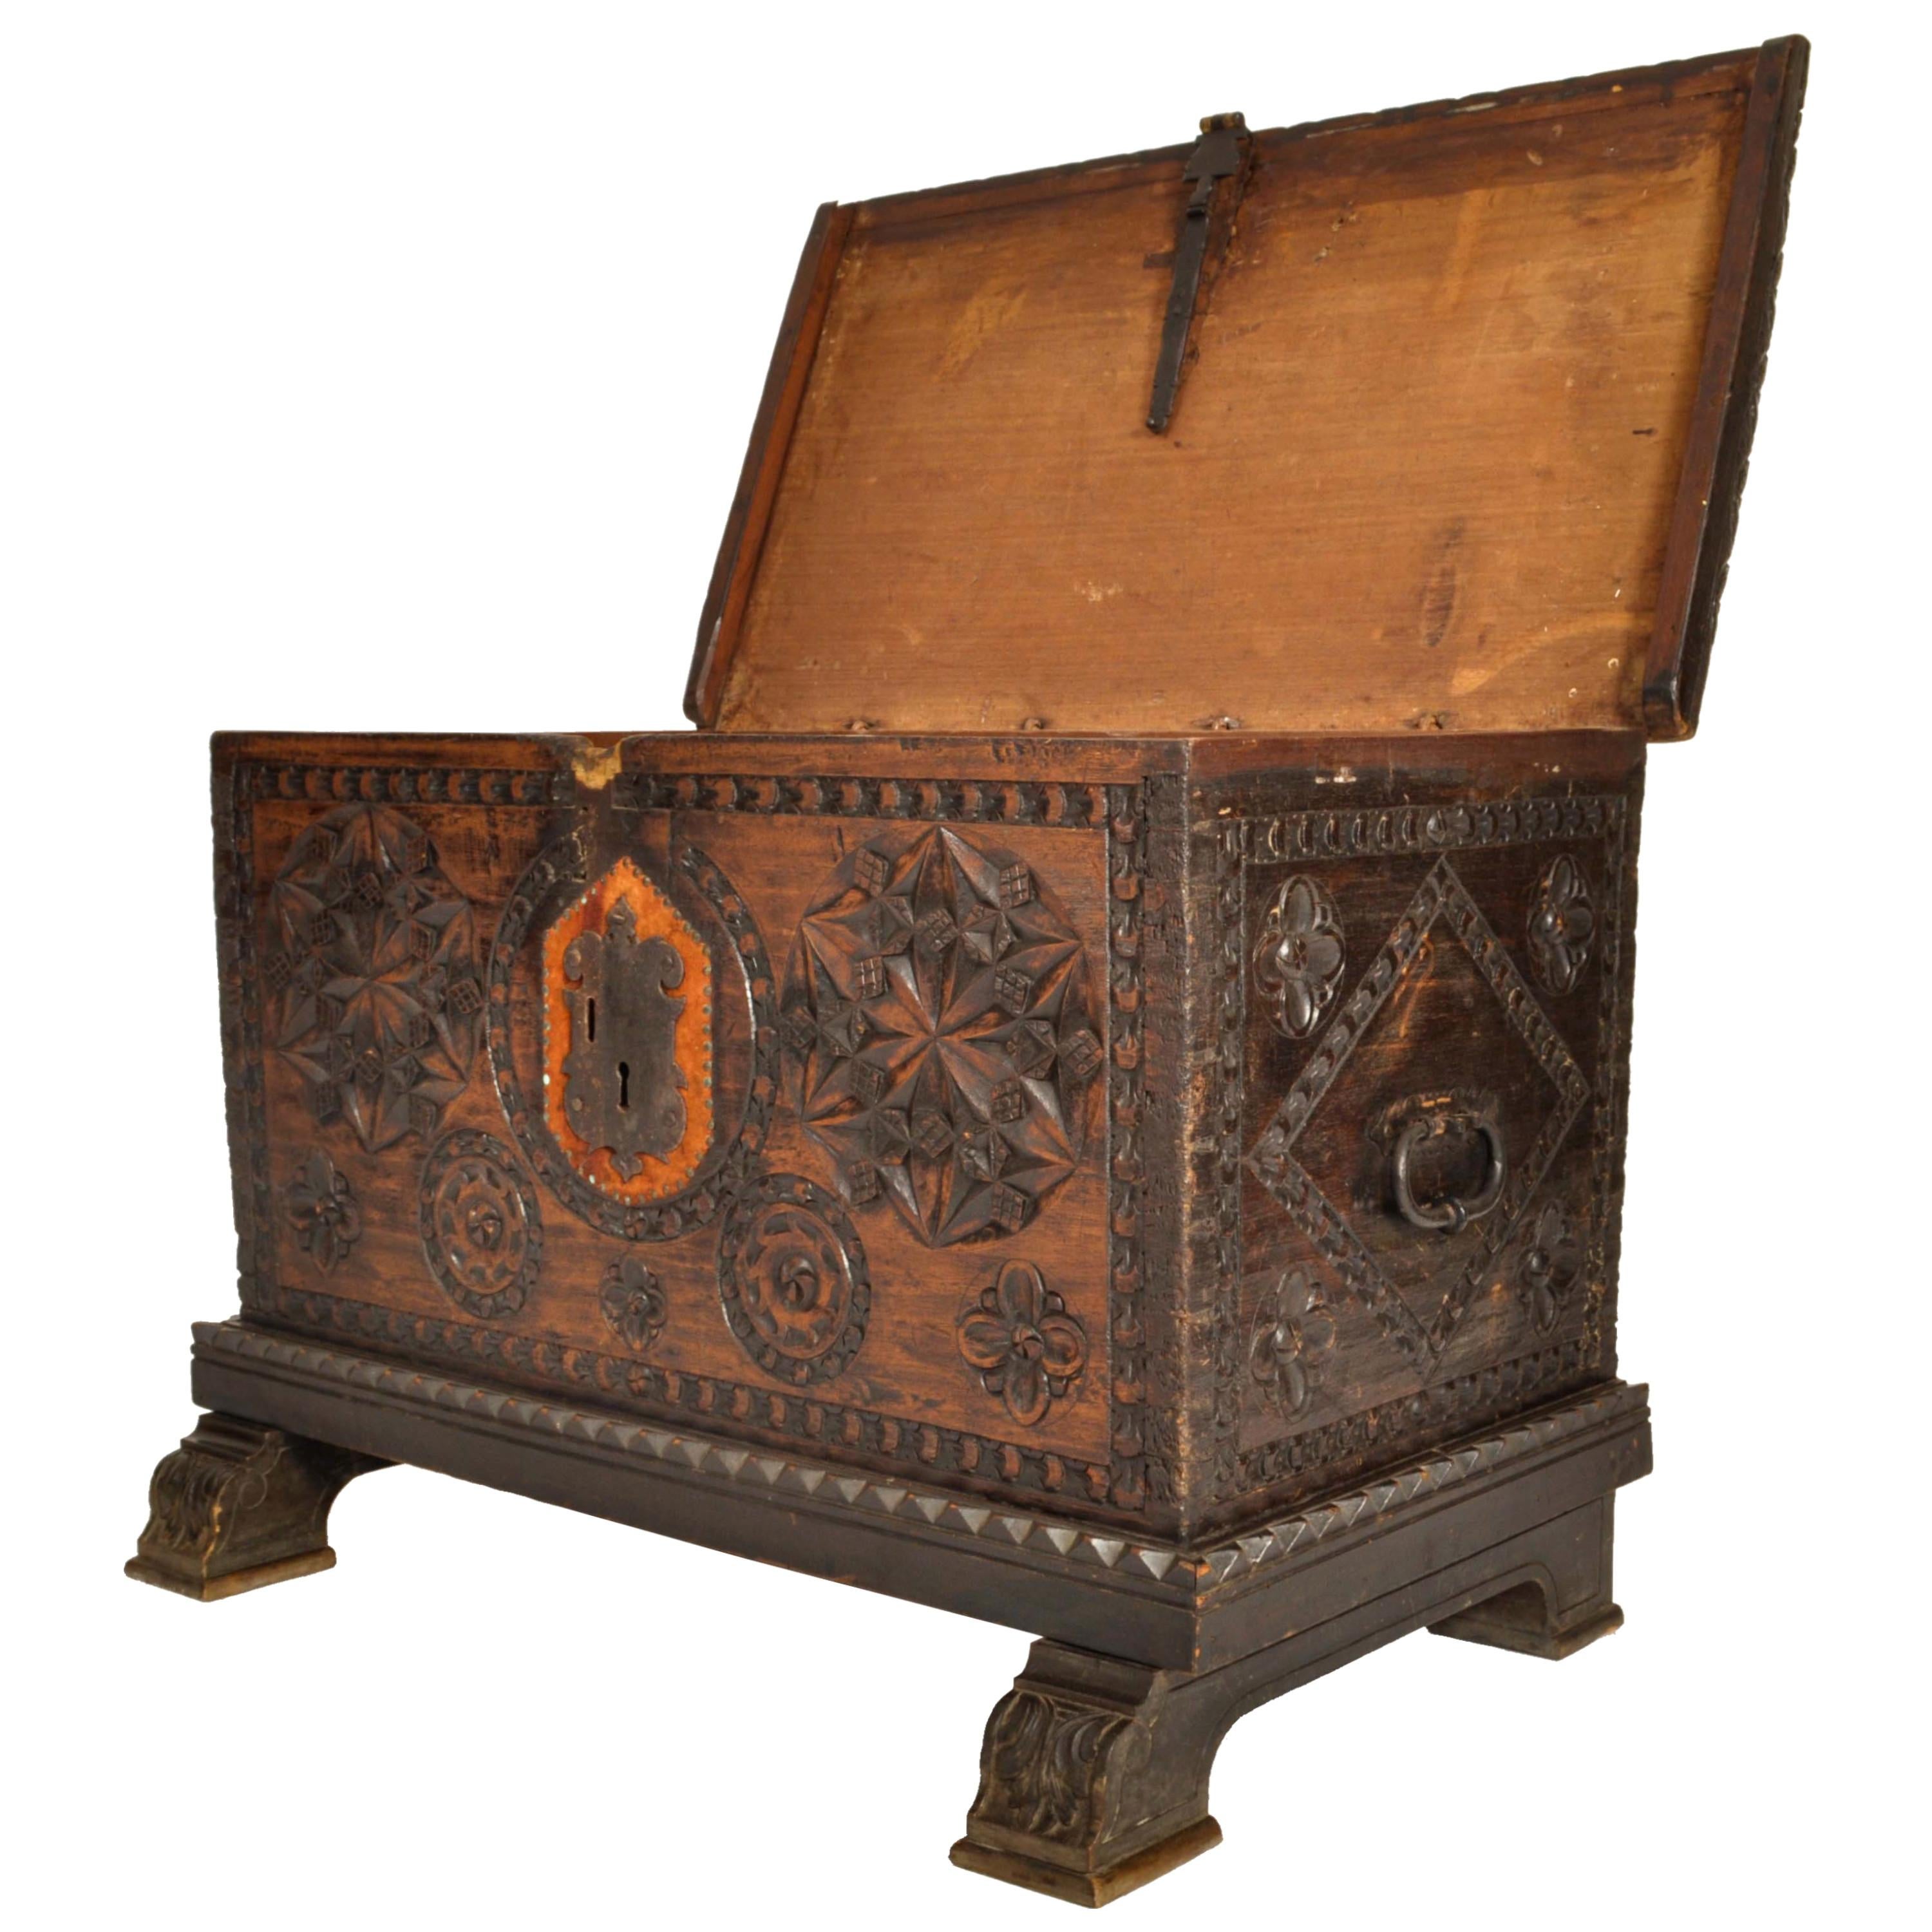 Antique Scandinavian Pine Baroque Folk Art Carved Dowry Chest Trunk Coffer 1780 For Sale 7